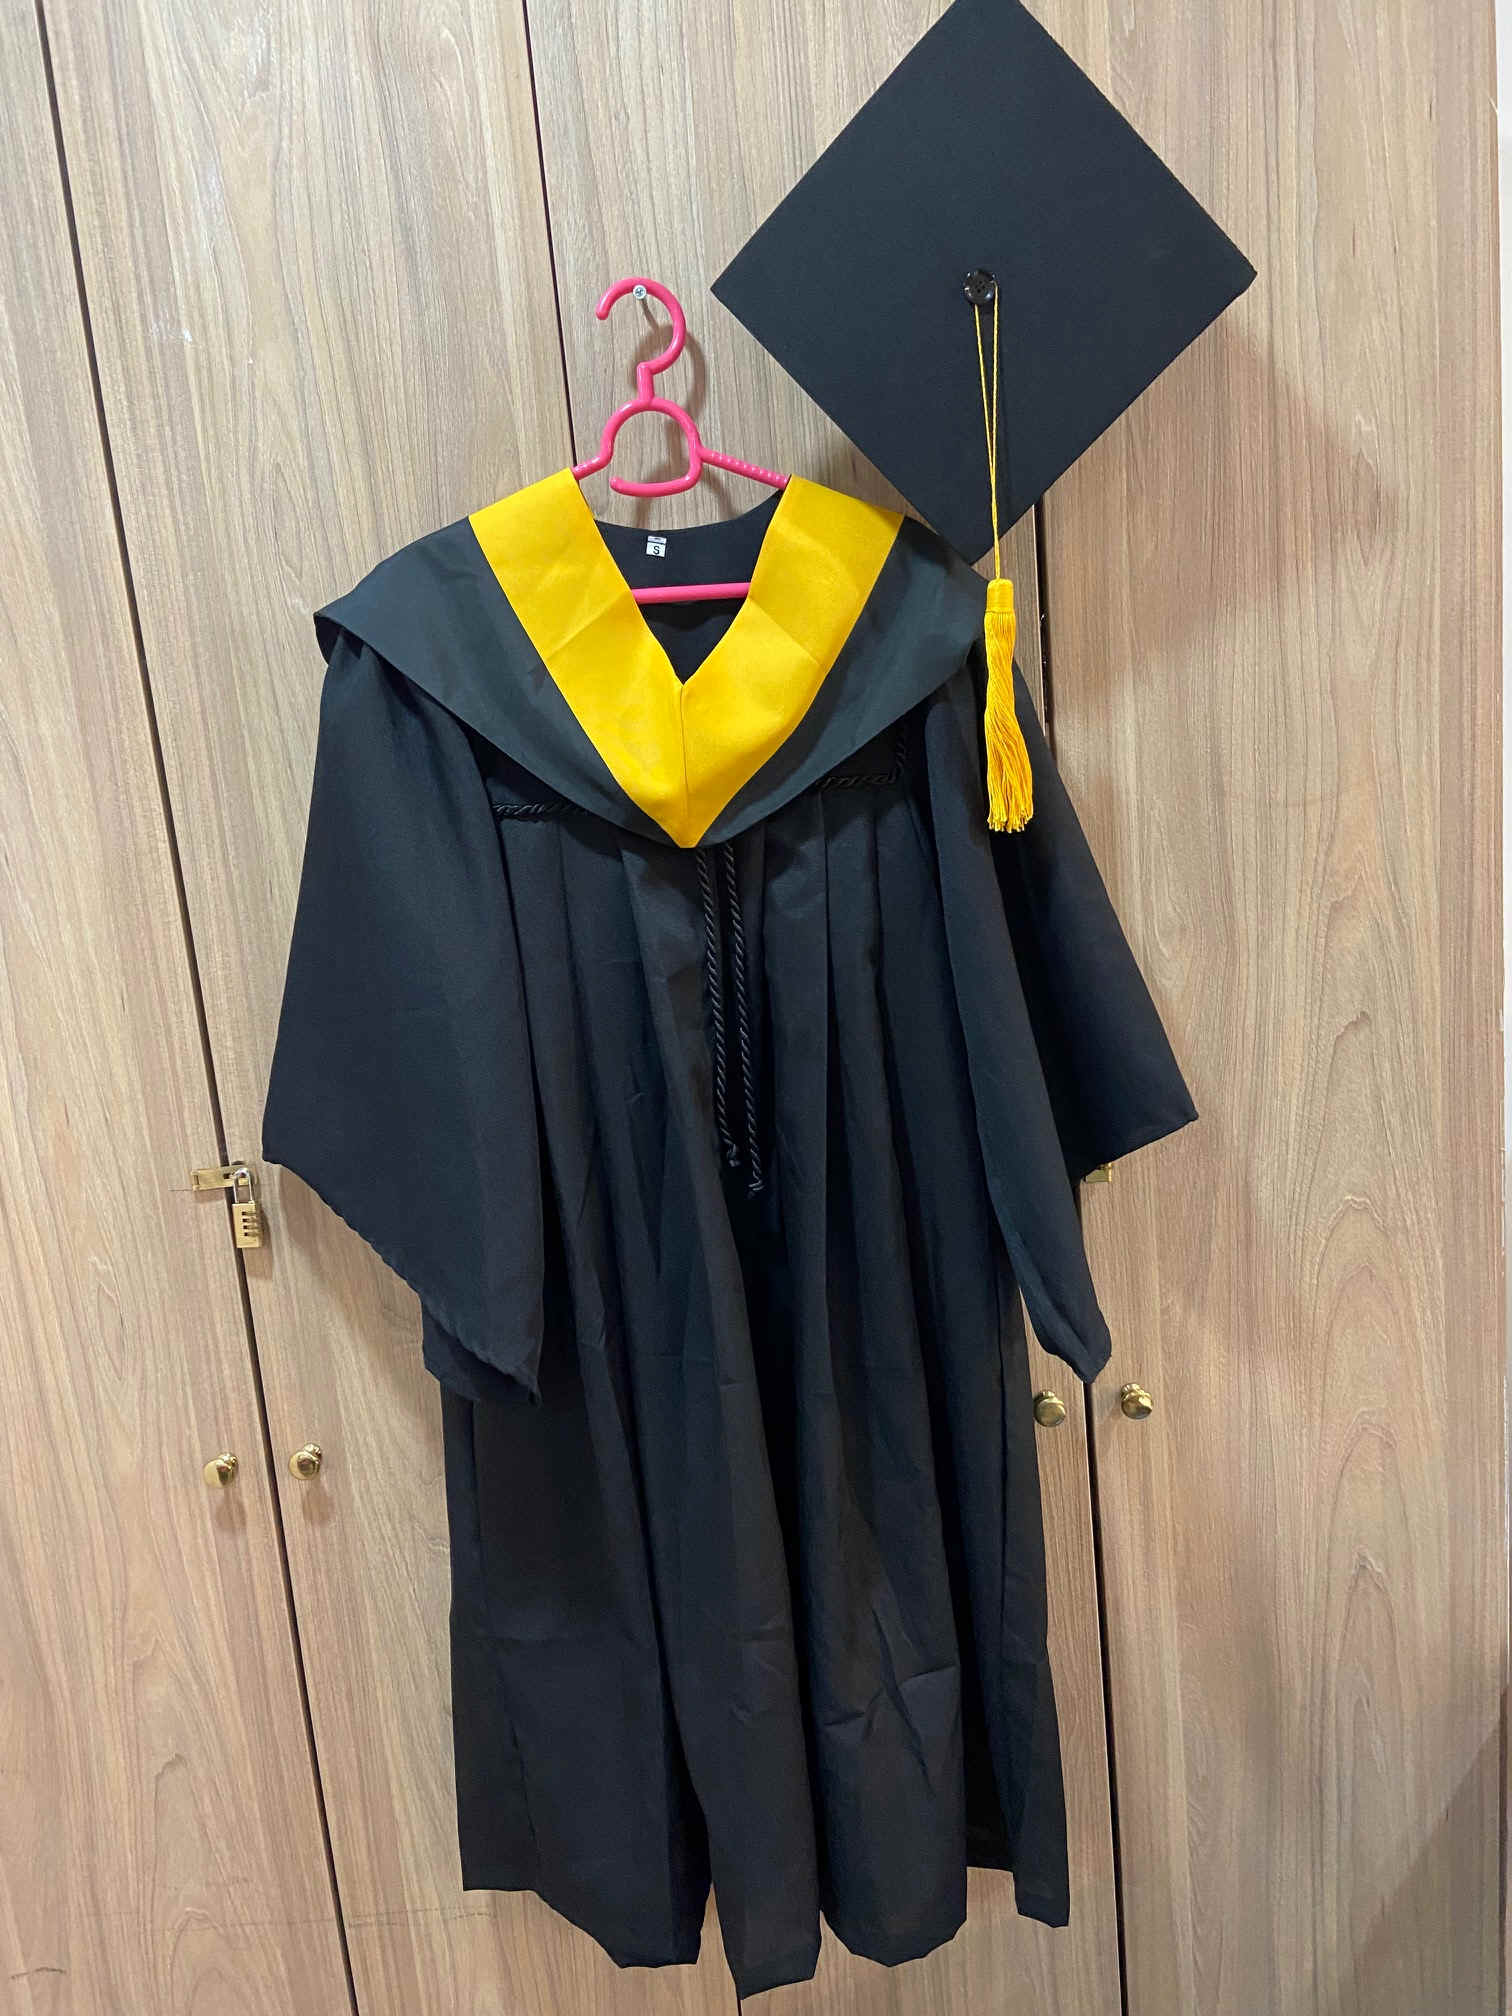 Indicative Graduation Gowns Samples